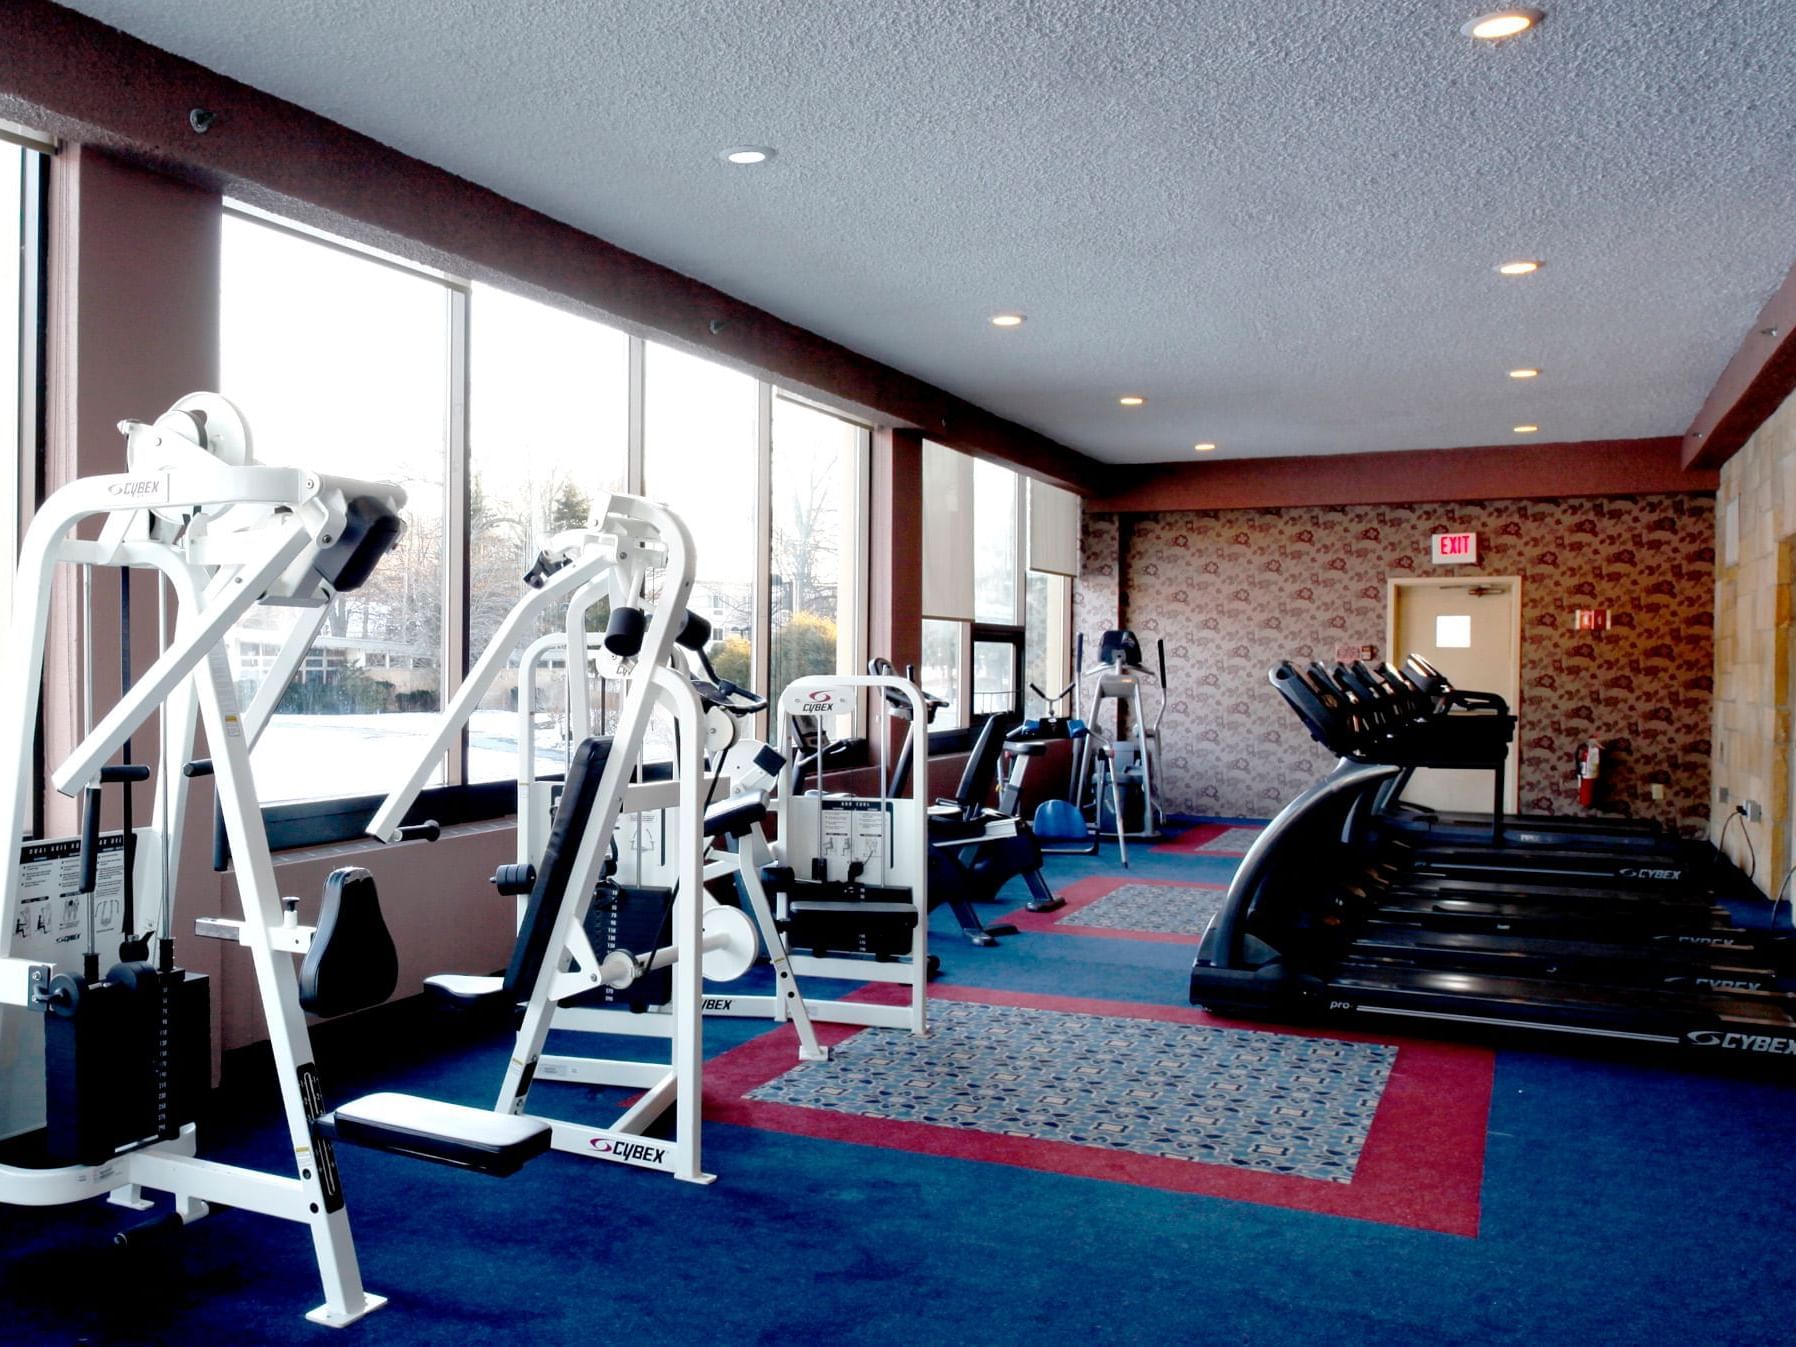 Exercise machines in Fitness Center at Honor’s Haven Retreat